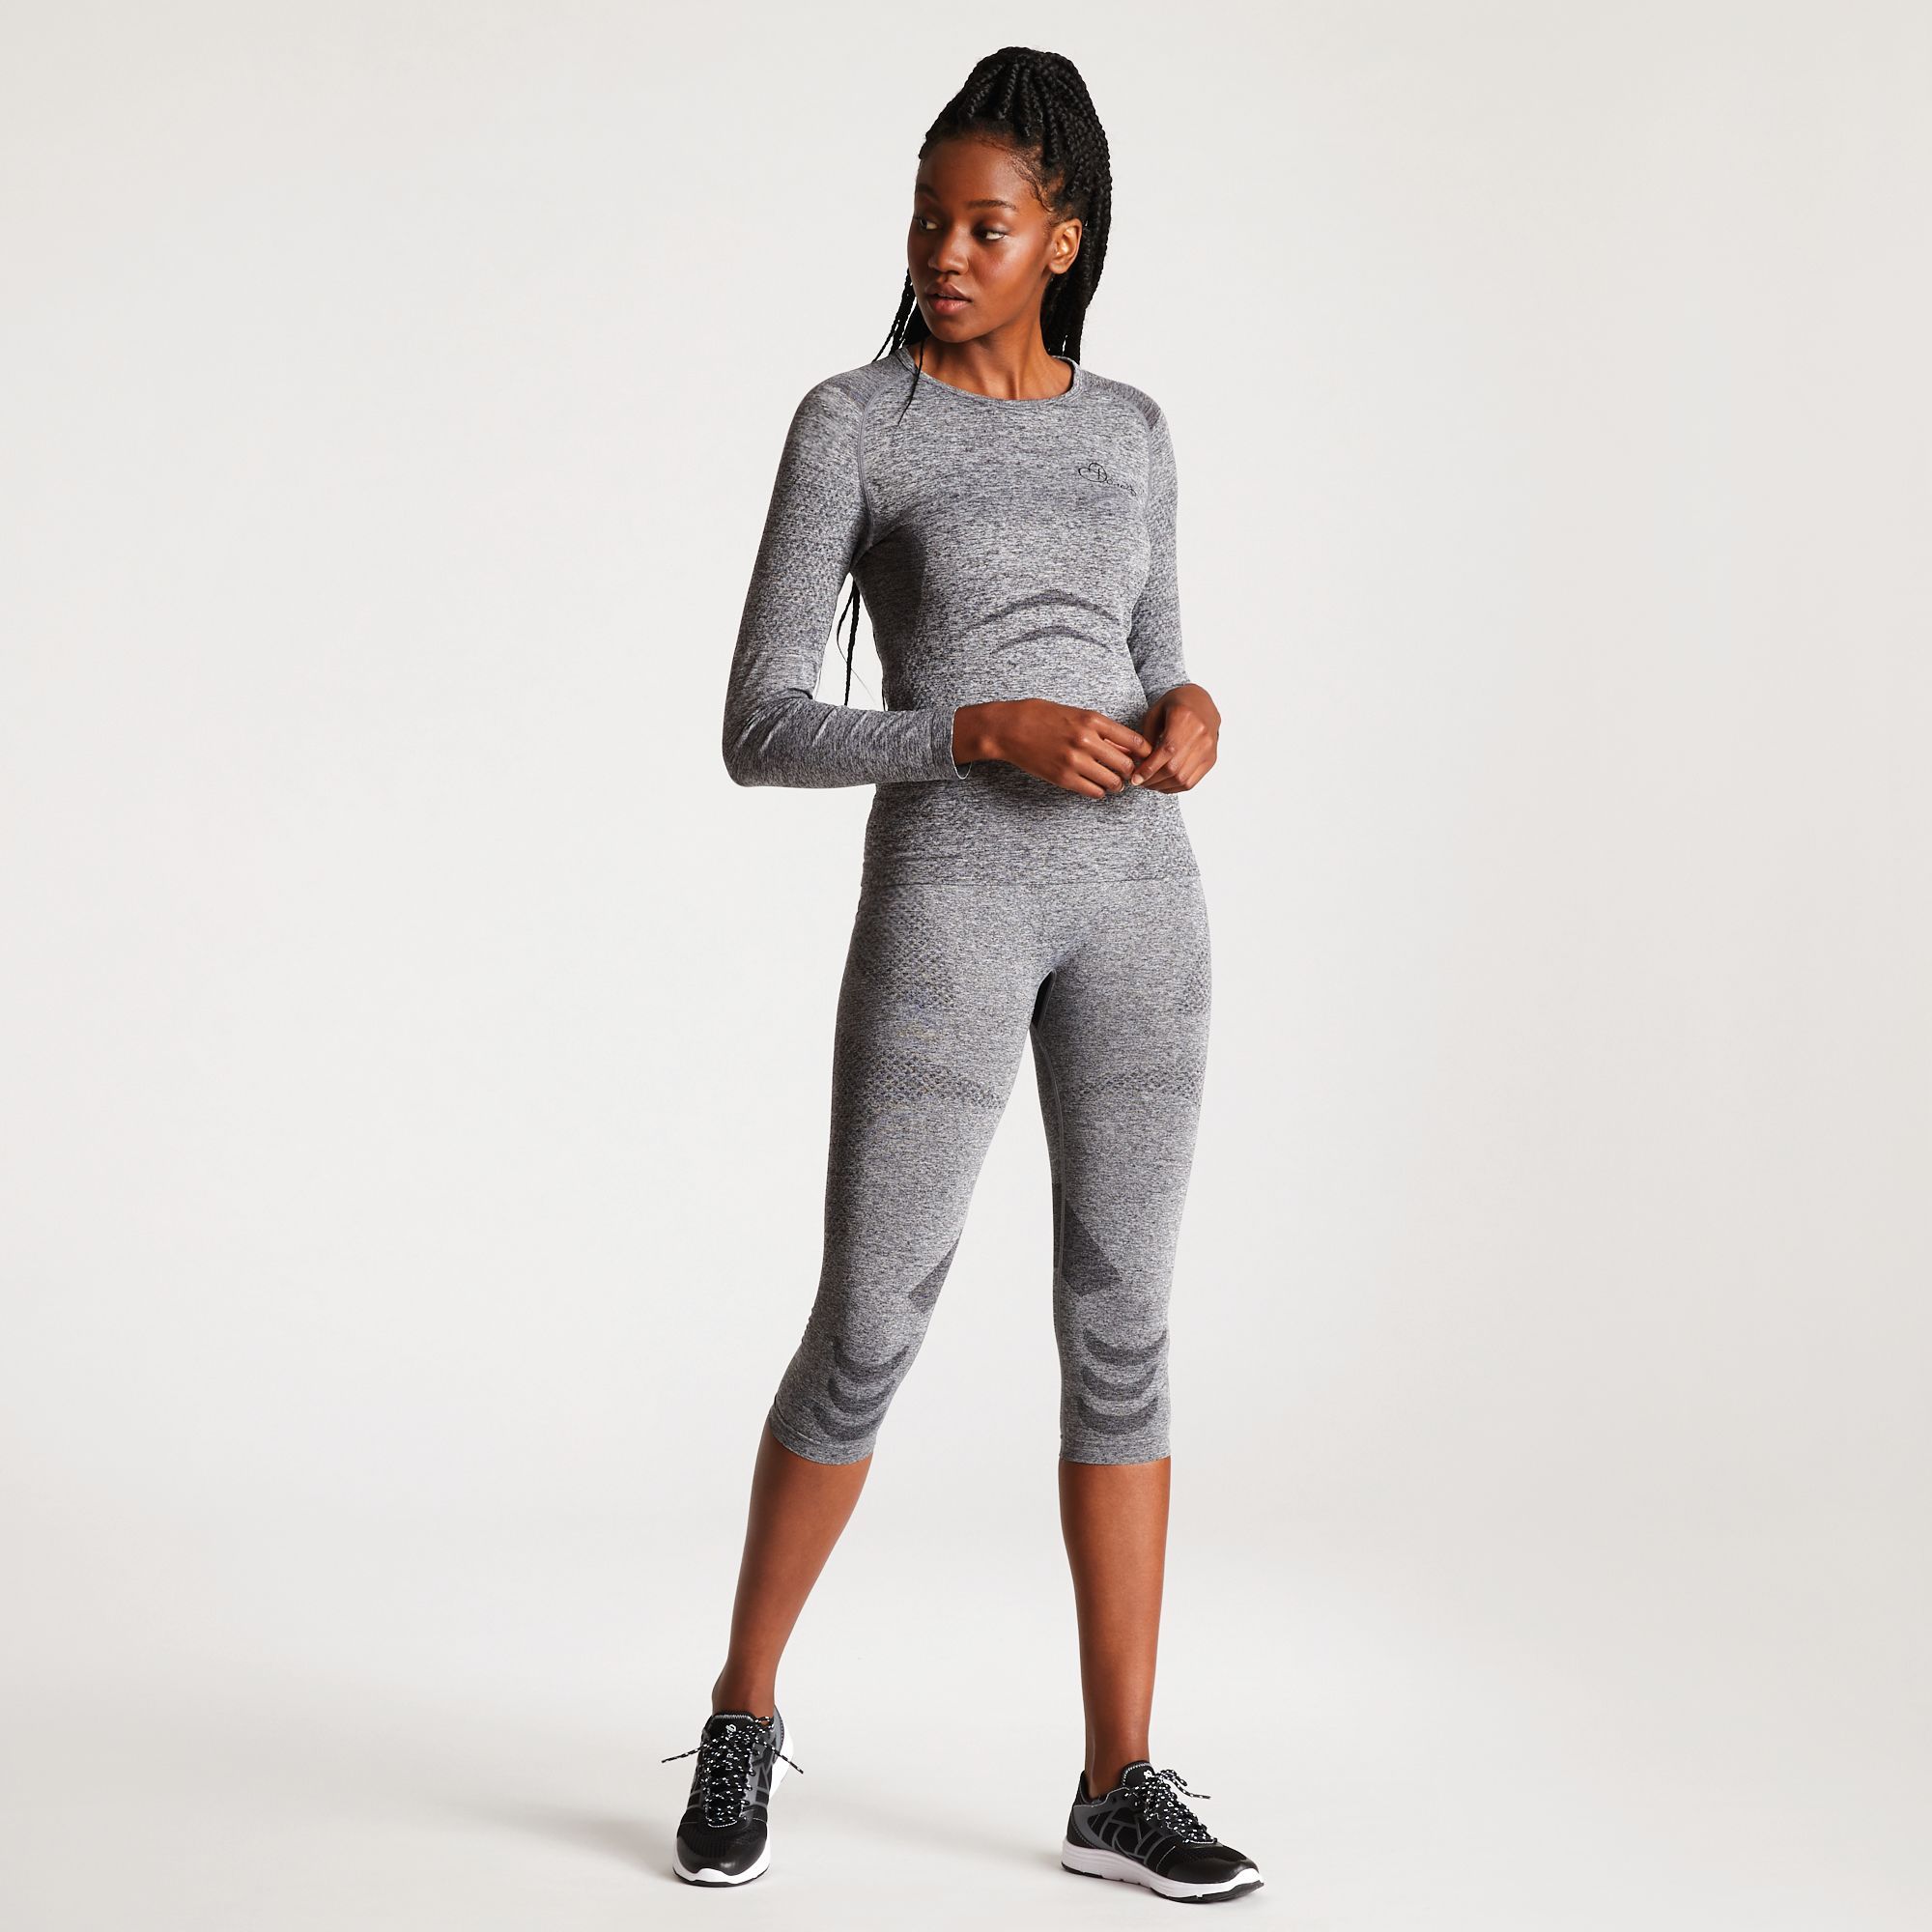 BODY performance base layer - advanced synthetic/elastane yarns. Ergonomic body map fit. Seamless construction technology. Fast wicking and quick drying properties.  odour control treatment. 55% Polyester, 38% Polyamide, 7% Elastane. Dare 2B Womens Trousers Sizing (waist approx): 6 (22in/56cm), 8 (24in/61cm), 10 (26in/66cm), 12 (28in/71cm), 14 (30in/76cm), 16 (32in/81cm), 18 (34in/86cm), 20 (36in/92cm).